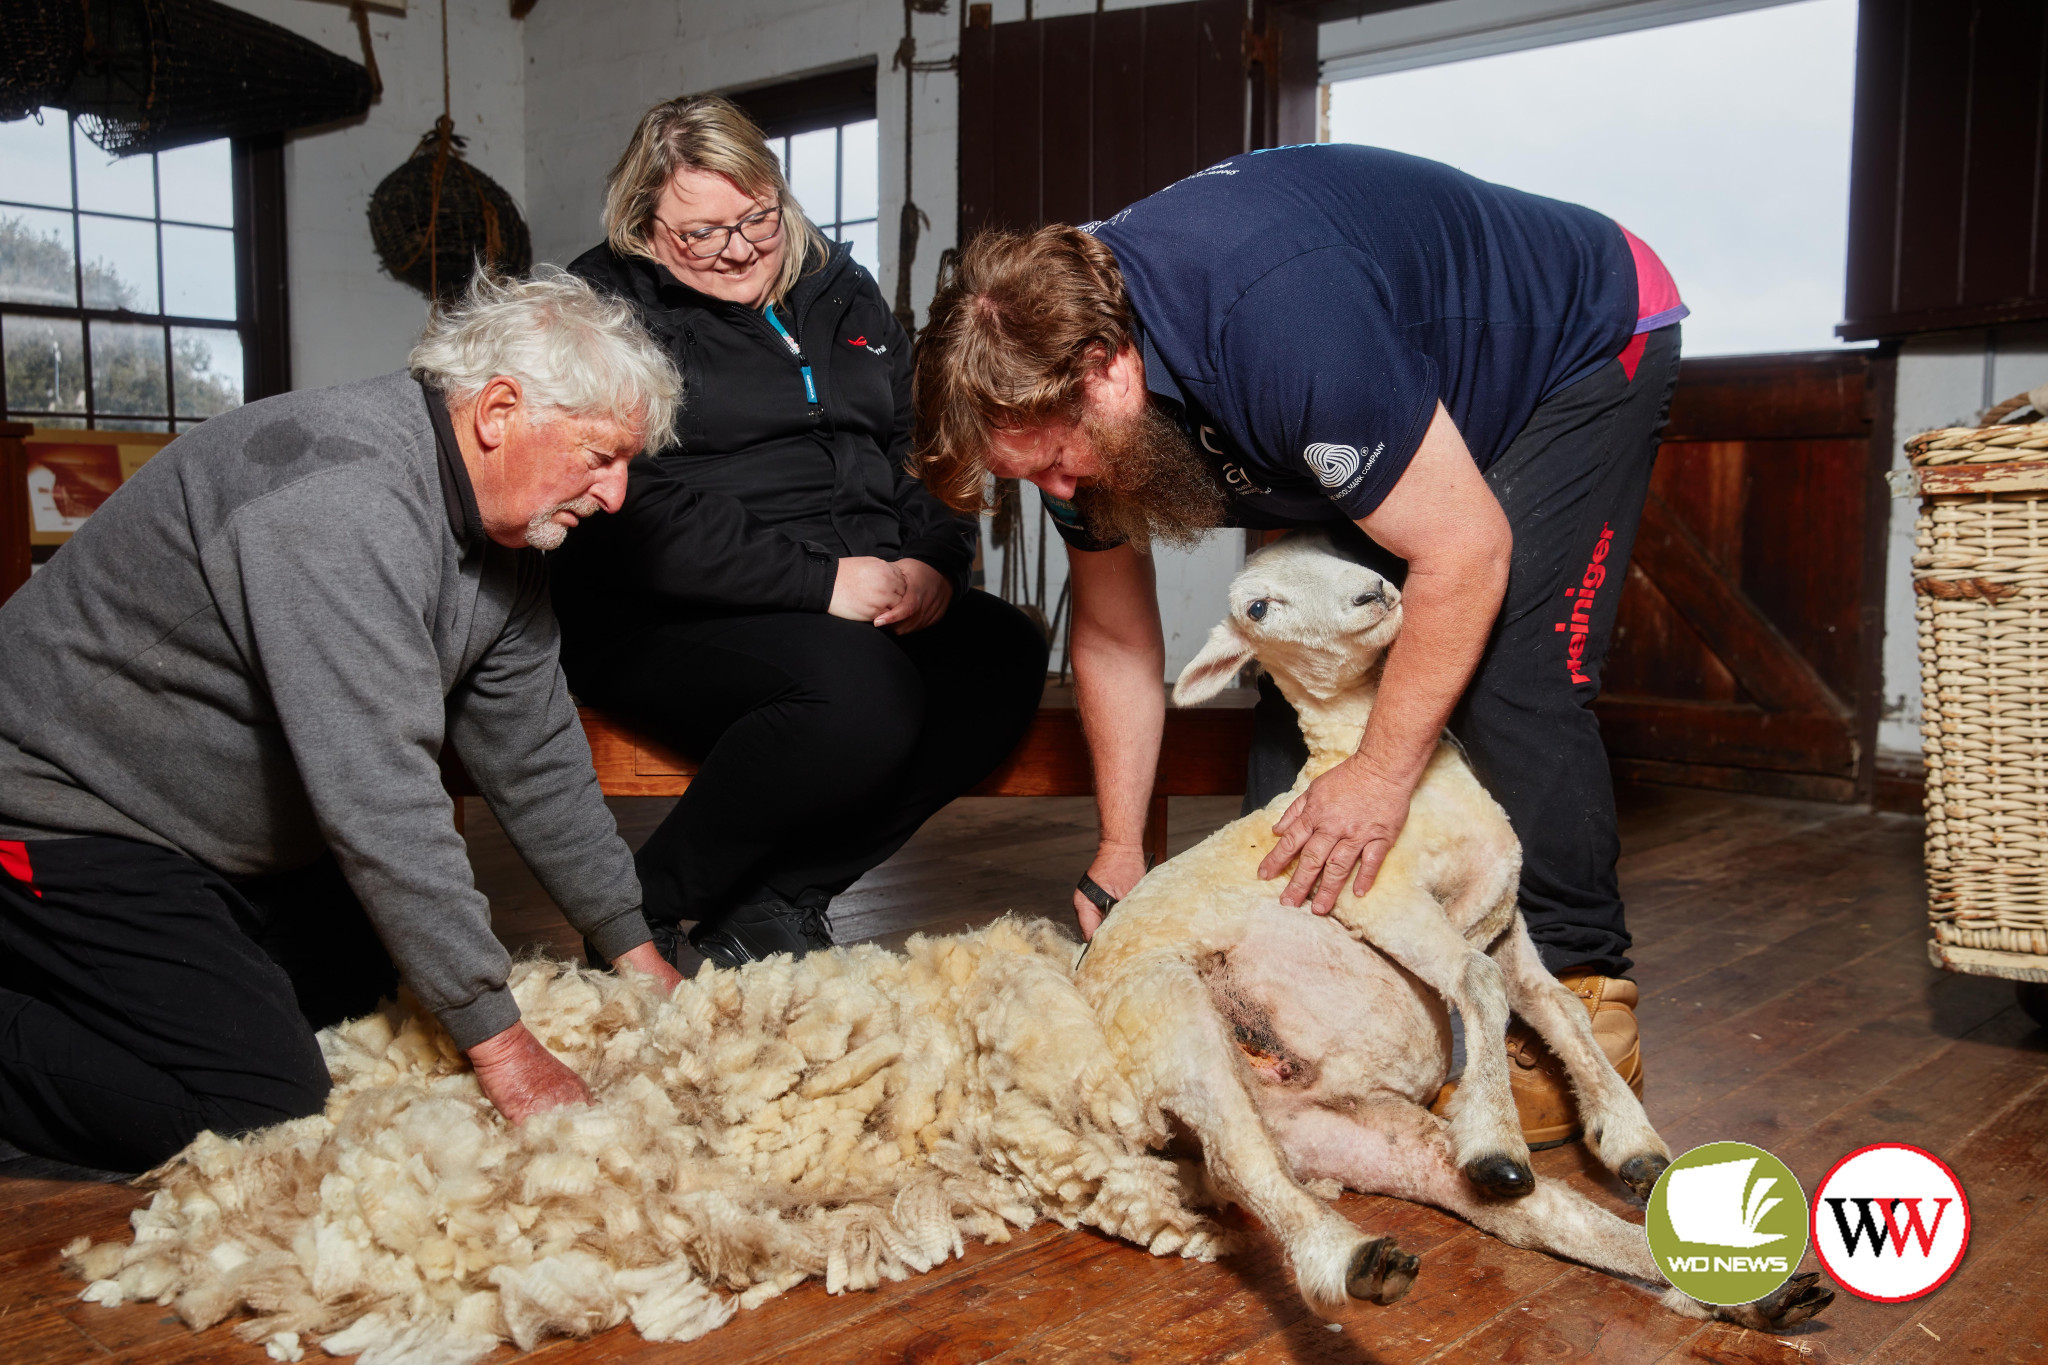 Terry shows Flagstaff Hill village activations coordinator Kate Wake how to shear a sheep.